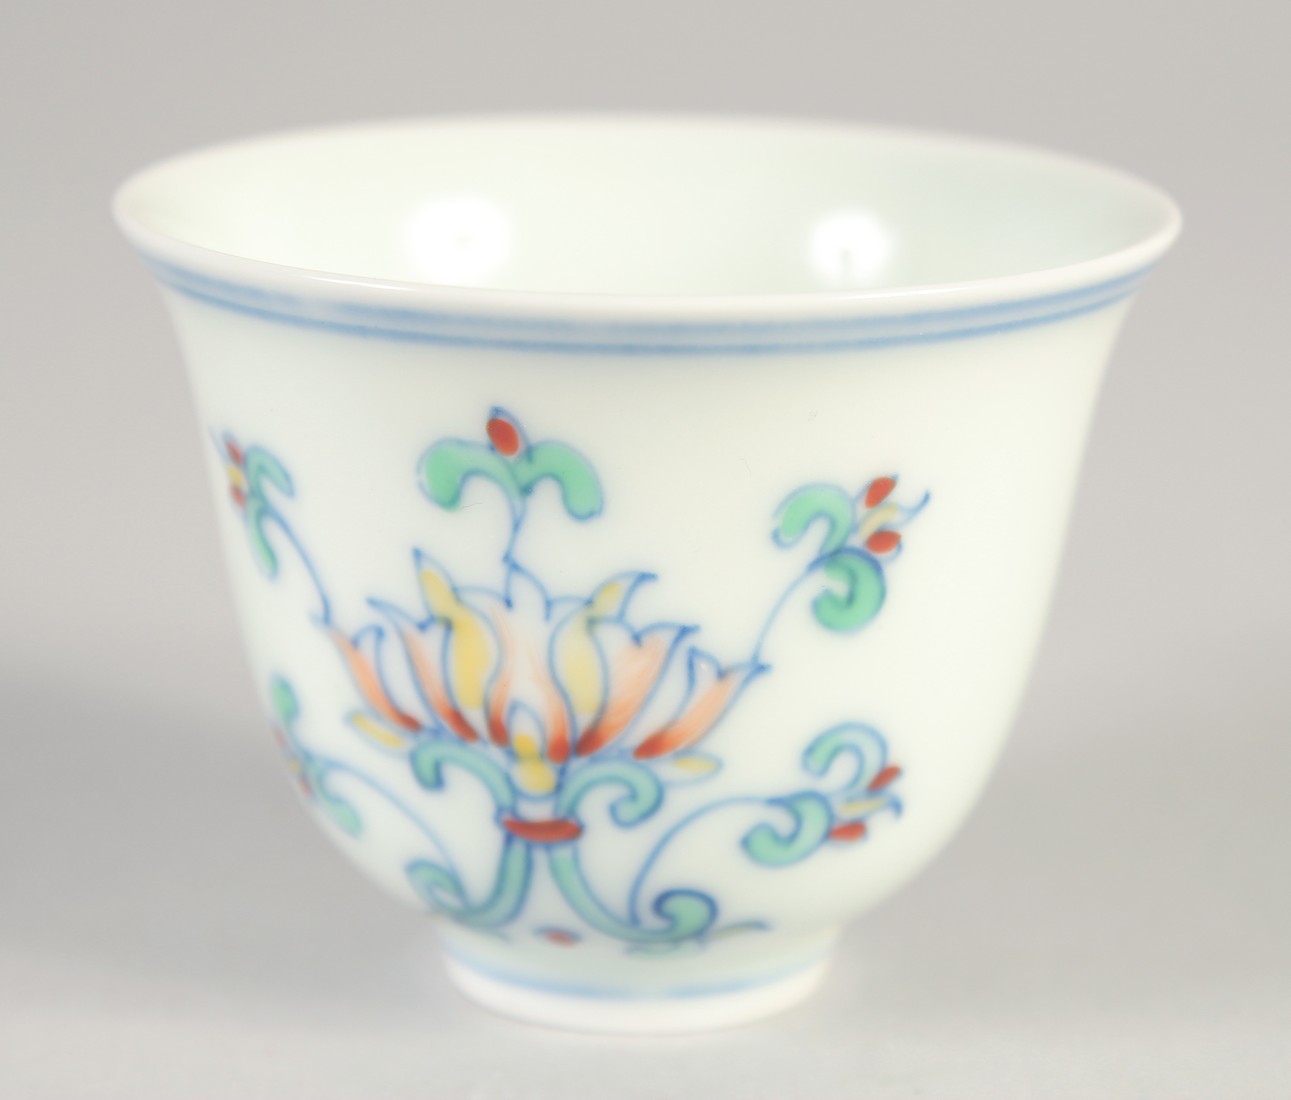 A CHINESE DOUCAI PORCELAIN CUP, with six-character mark, 6.5cm diameter.